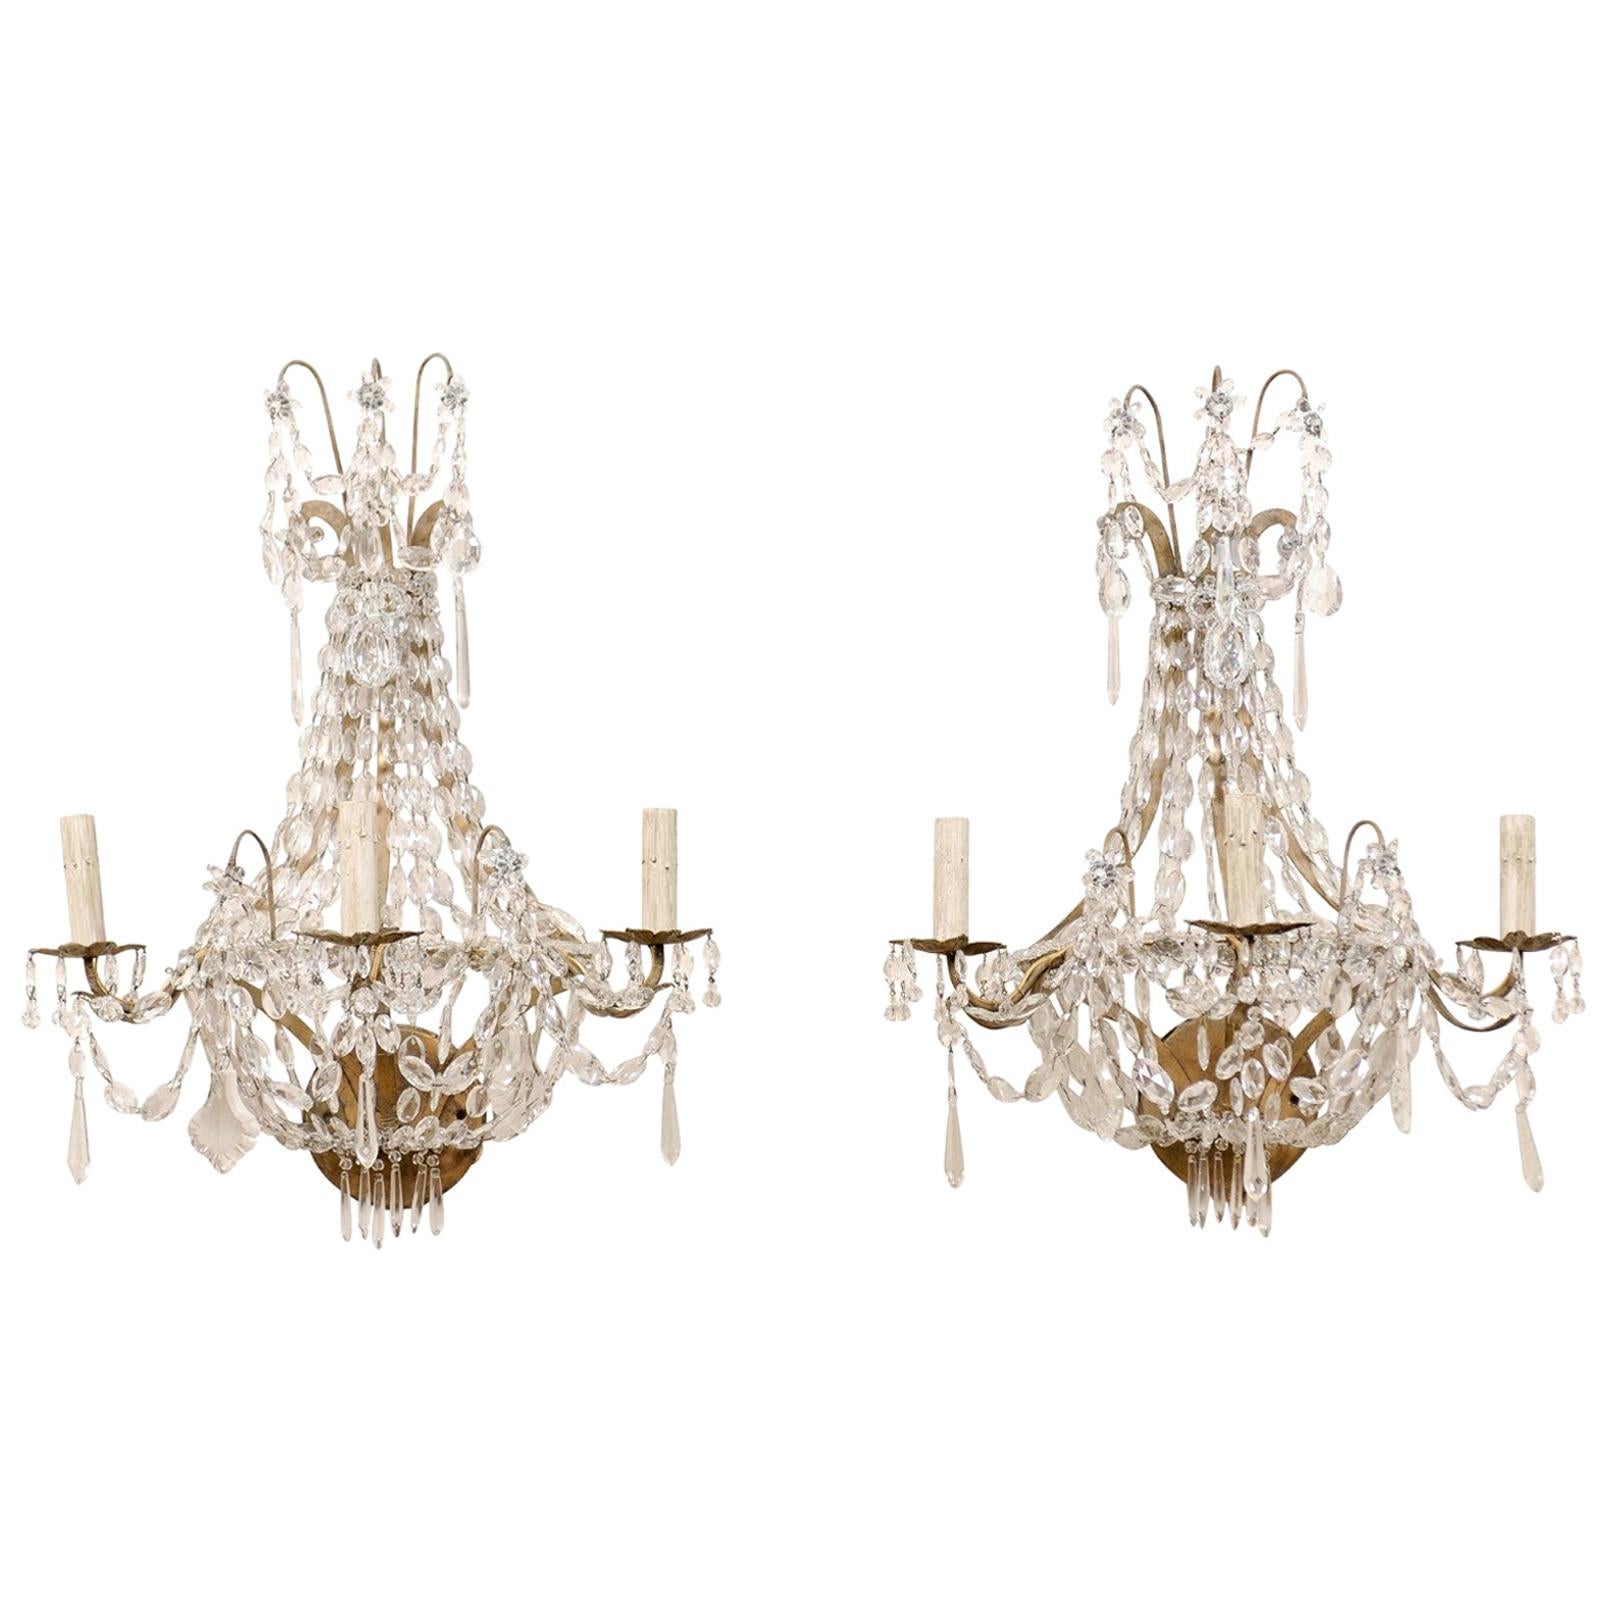 Elegant Pair of Mid-20th Century Crystal Waterfall Wall Sconces from France